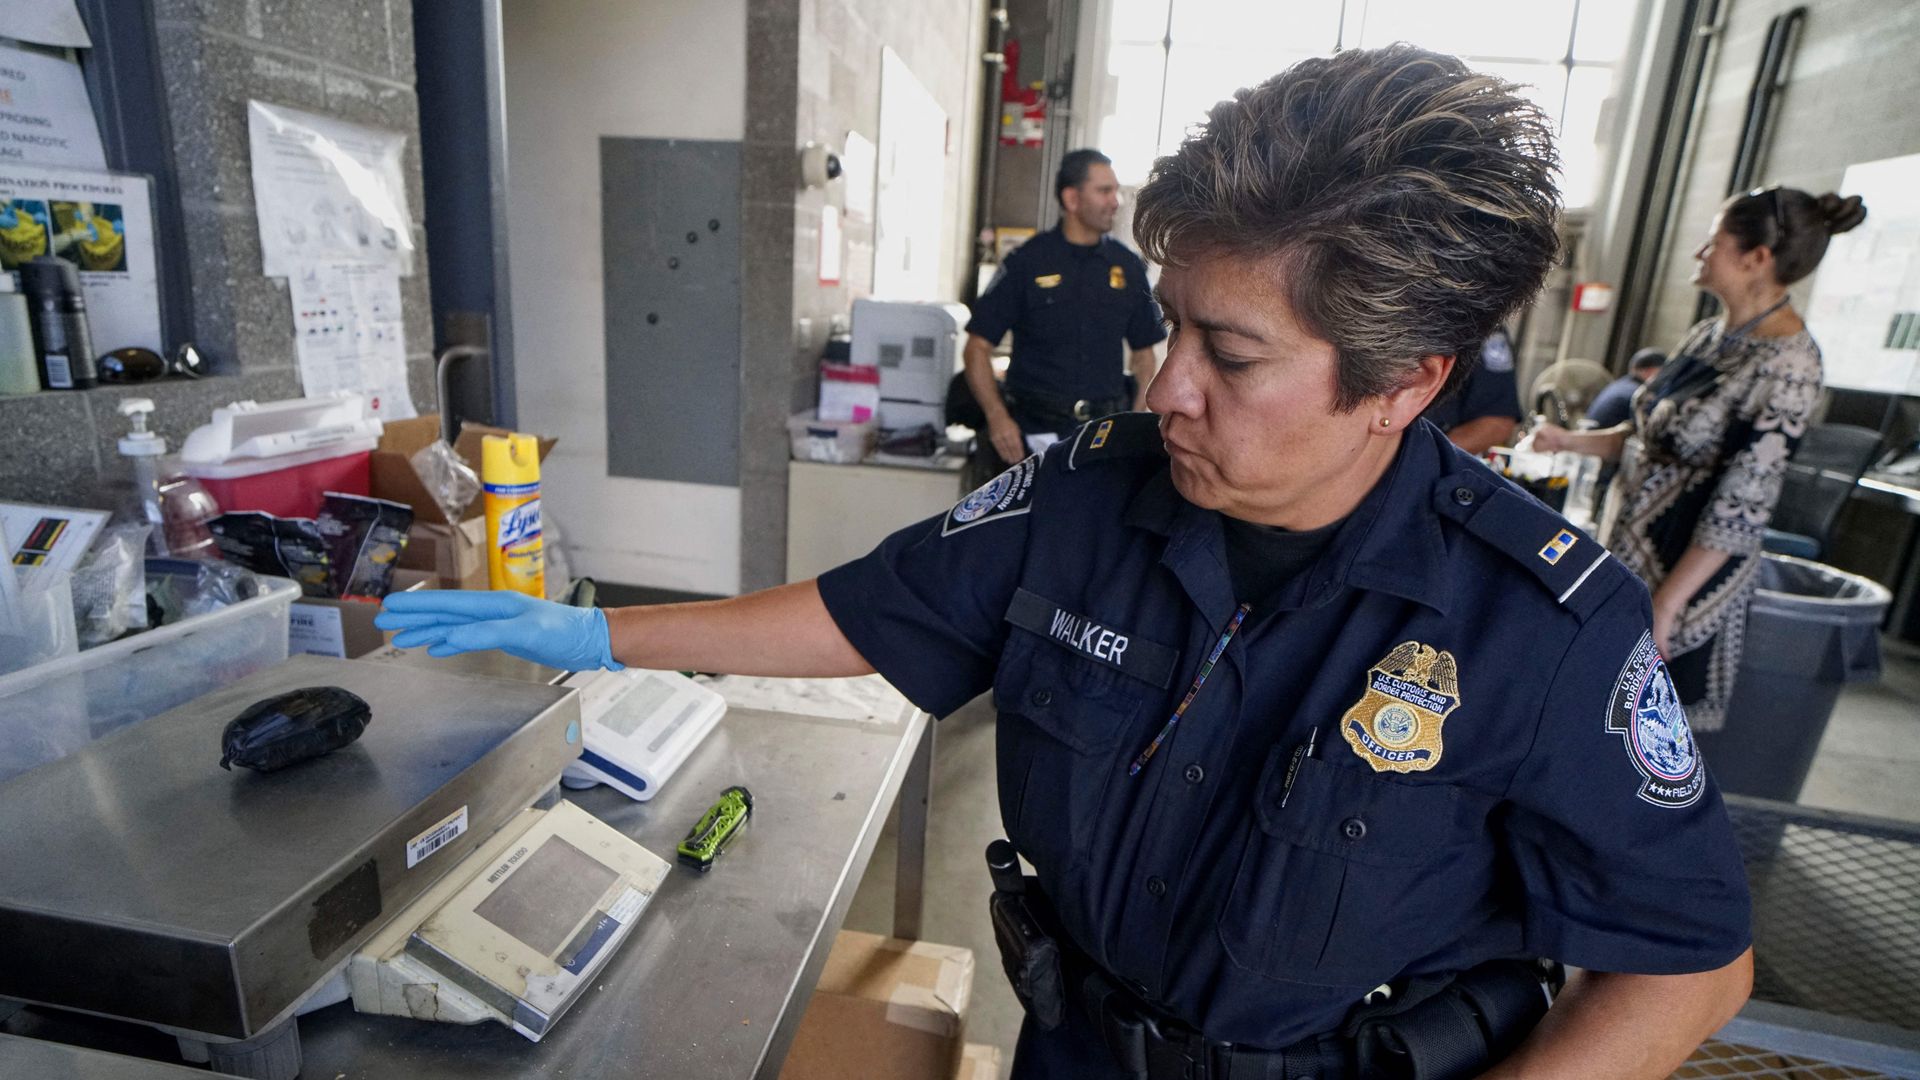 A US Customs and Border Protection agent weighs a package of Fentanyl at the San Ysidro Port of Entry on October 2, 2019 in San Ysidro, California. 